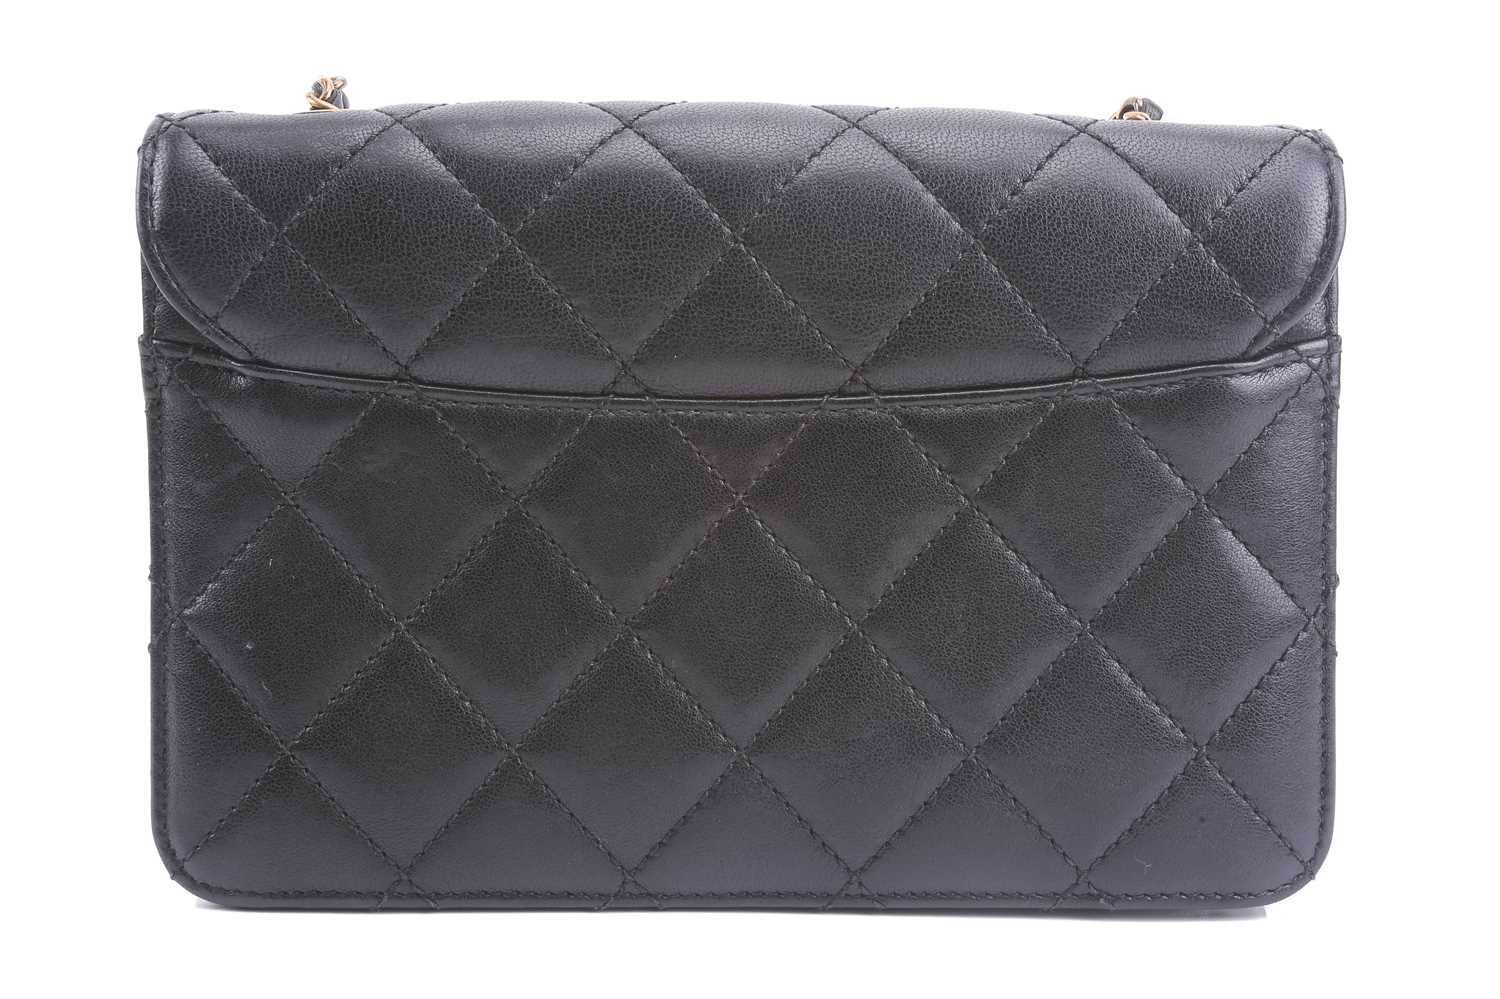 Chanel - a mini Beauty Lock flap bag in black quilted sheepskin leather, circa 2016, rectangular - Image 4 of 12